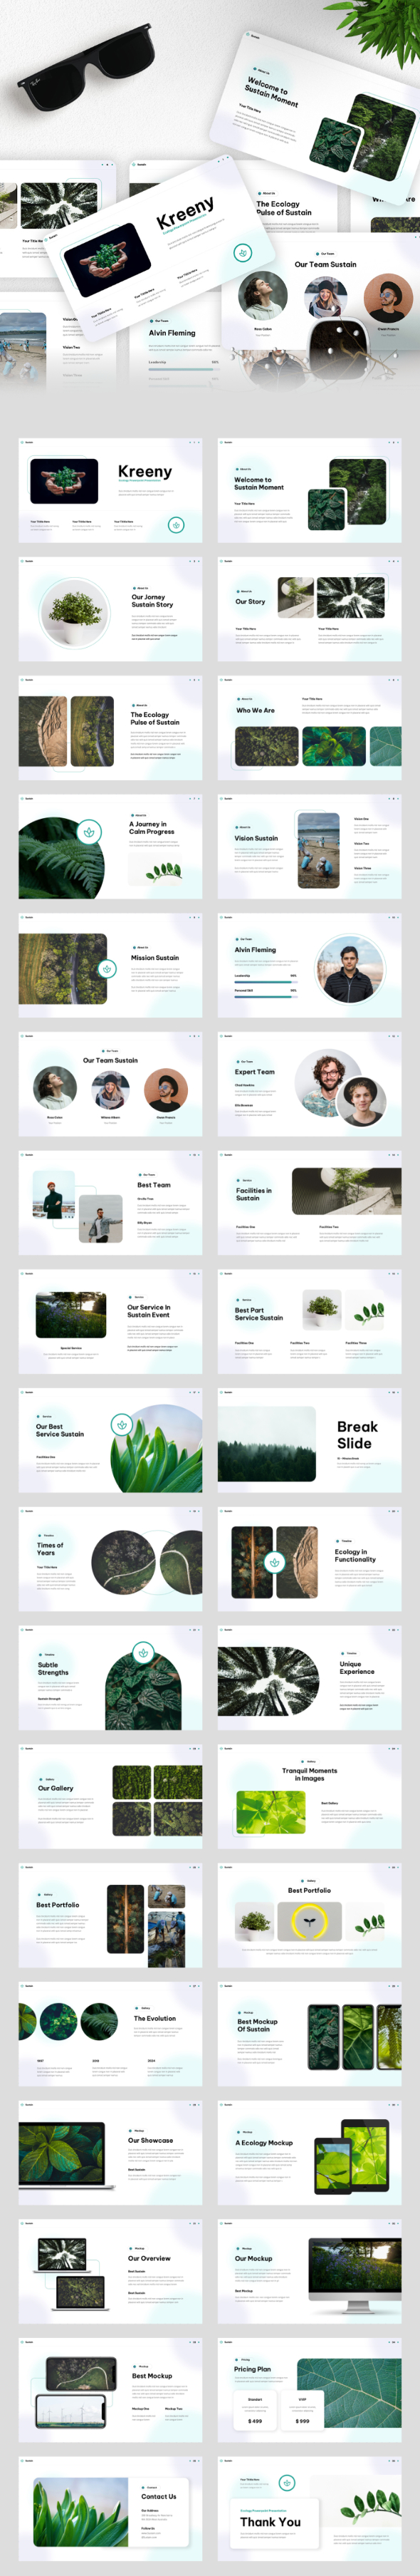 [DOWNLOAD]Kreeny - Ecology & Sustainable Google Slides Template